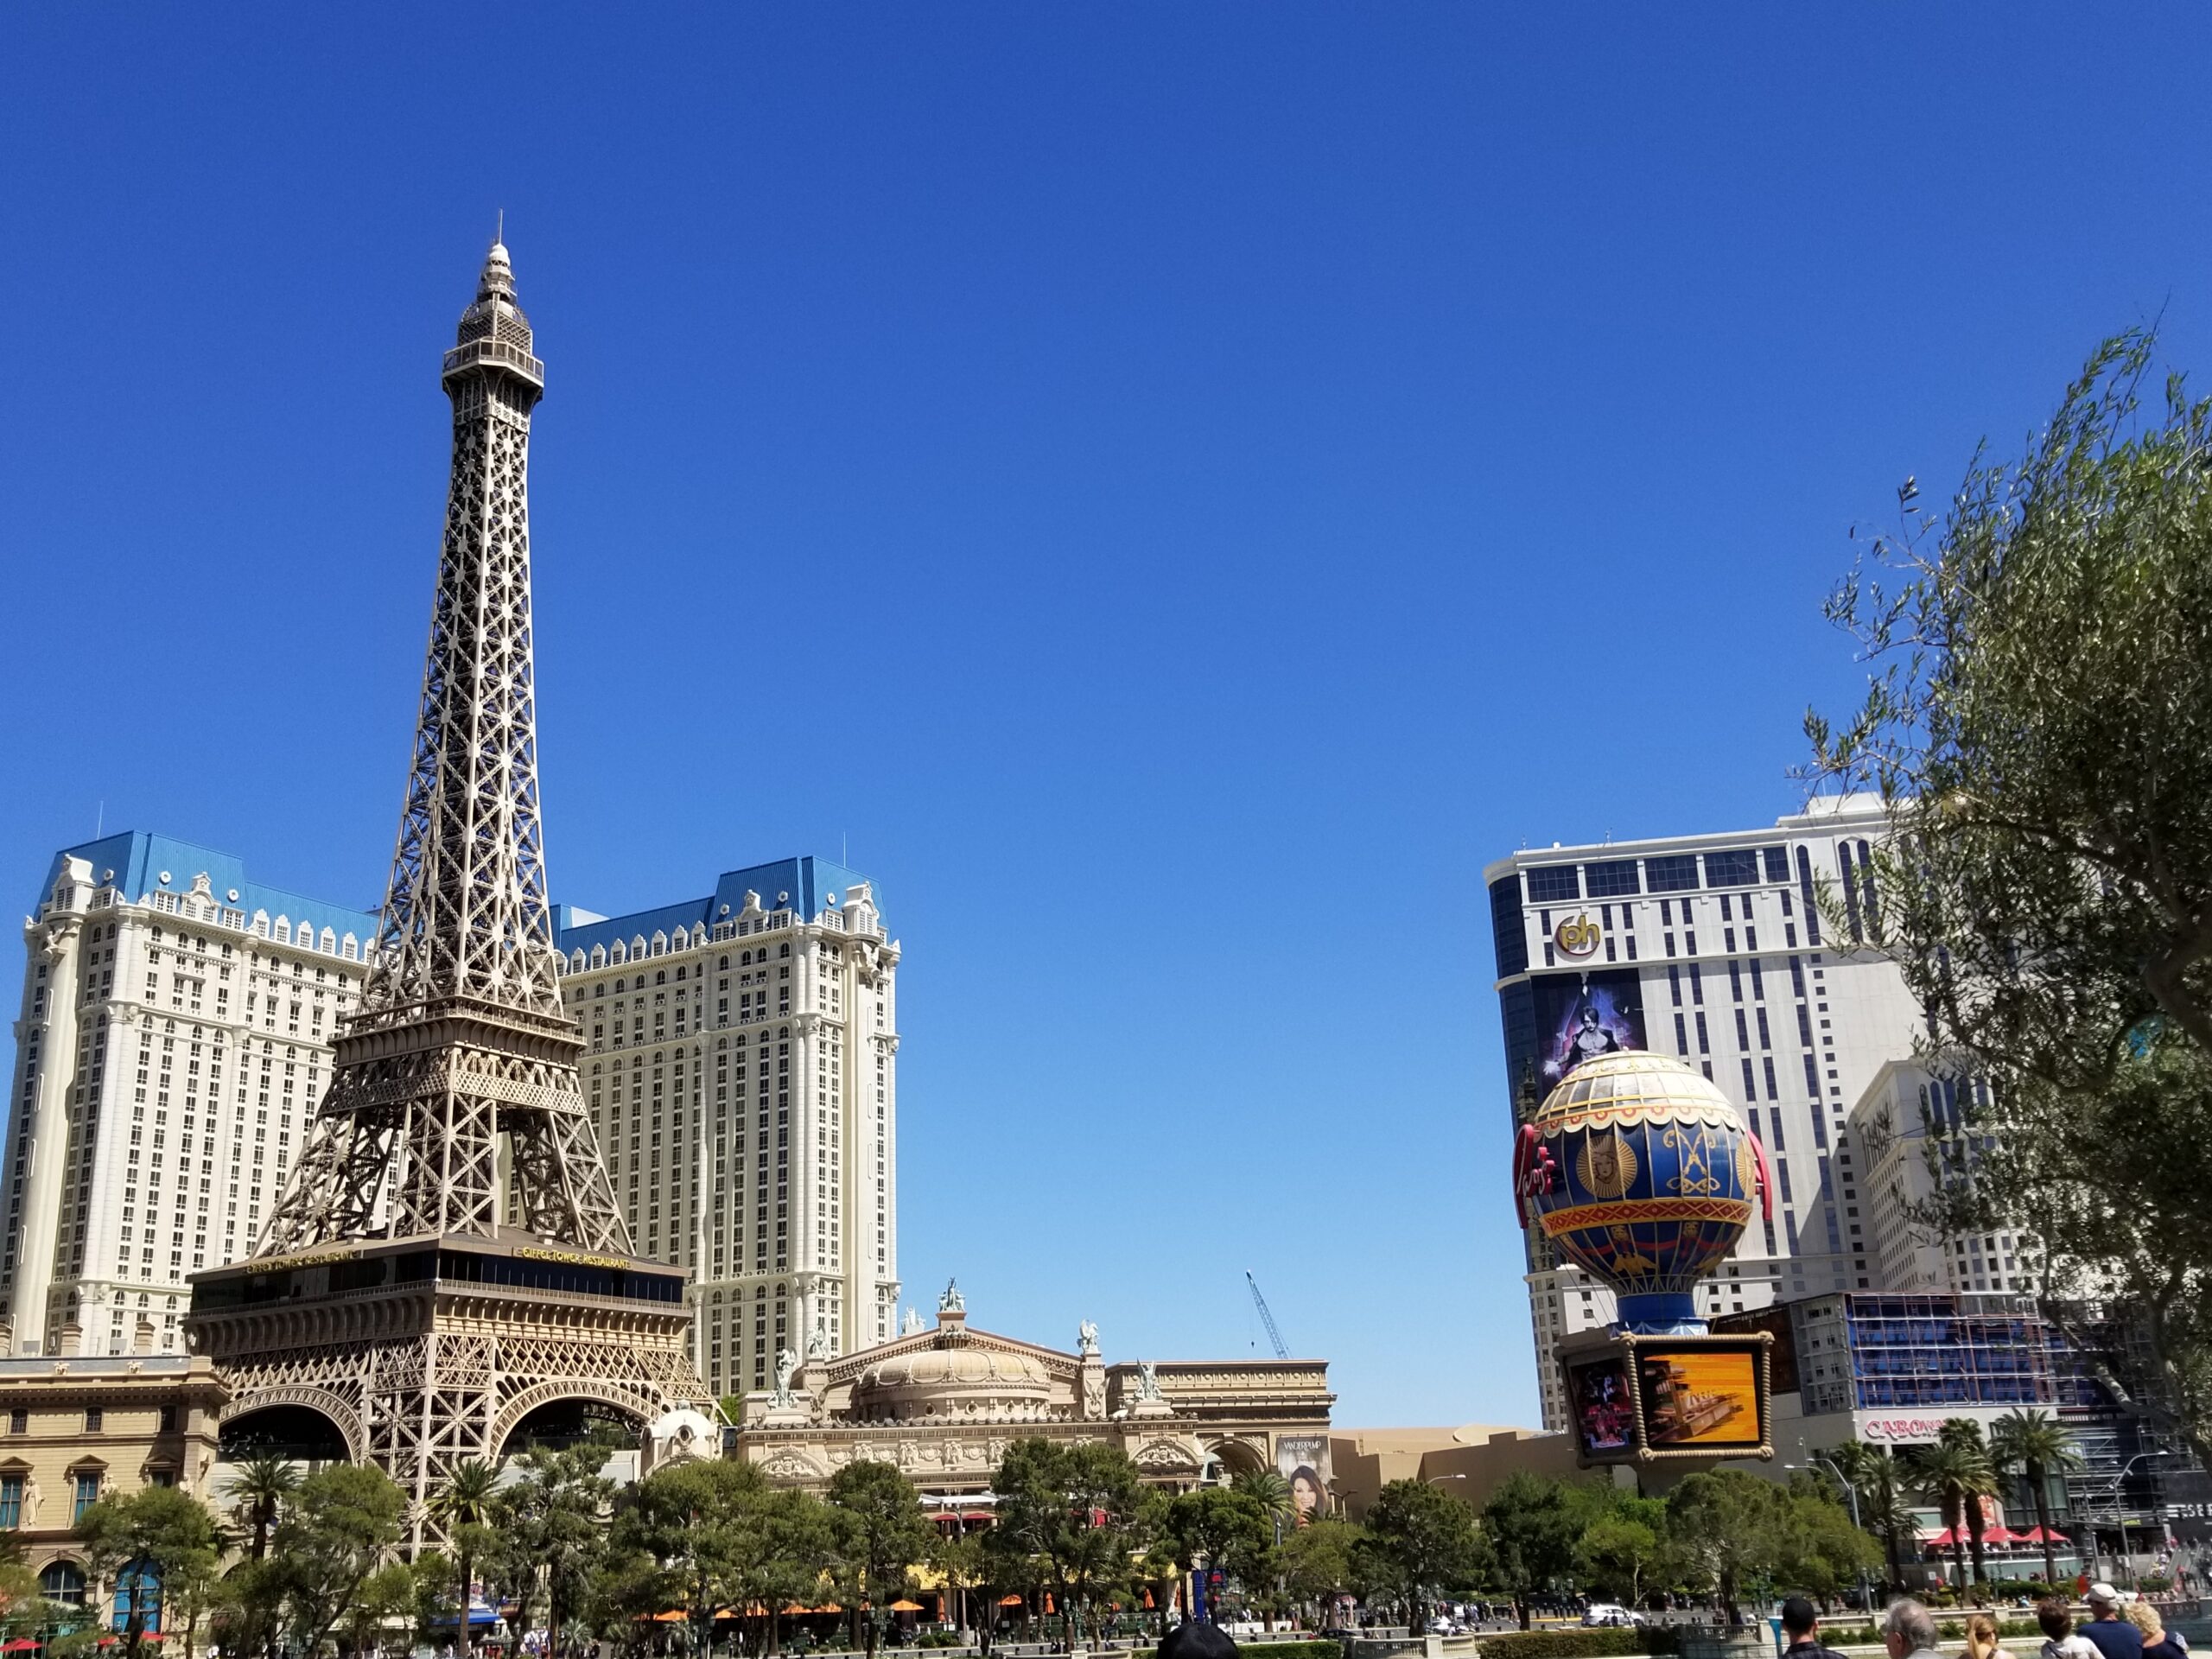 This image shows the Las Vegas skyline on a cloudless sunny day and features the Eiffel Tower replica at Paris, a replica hot air balloon, and several other hotel casinos.